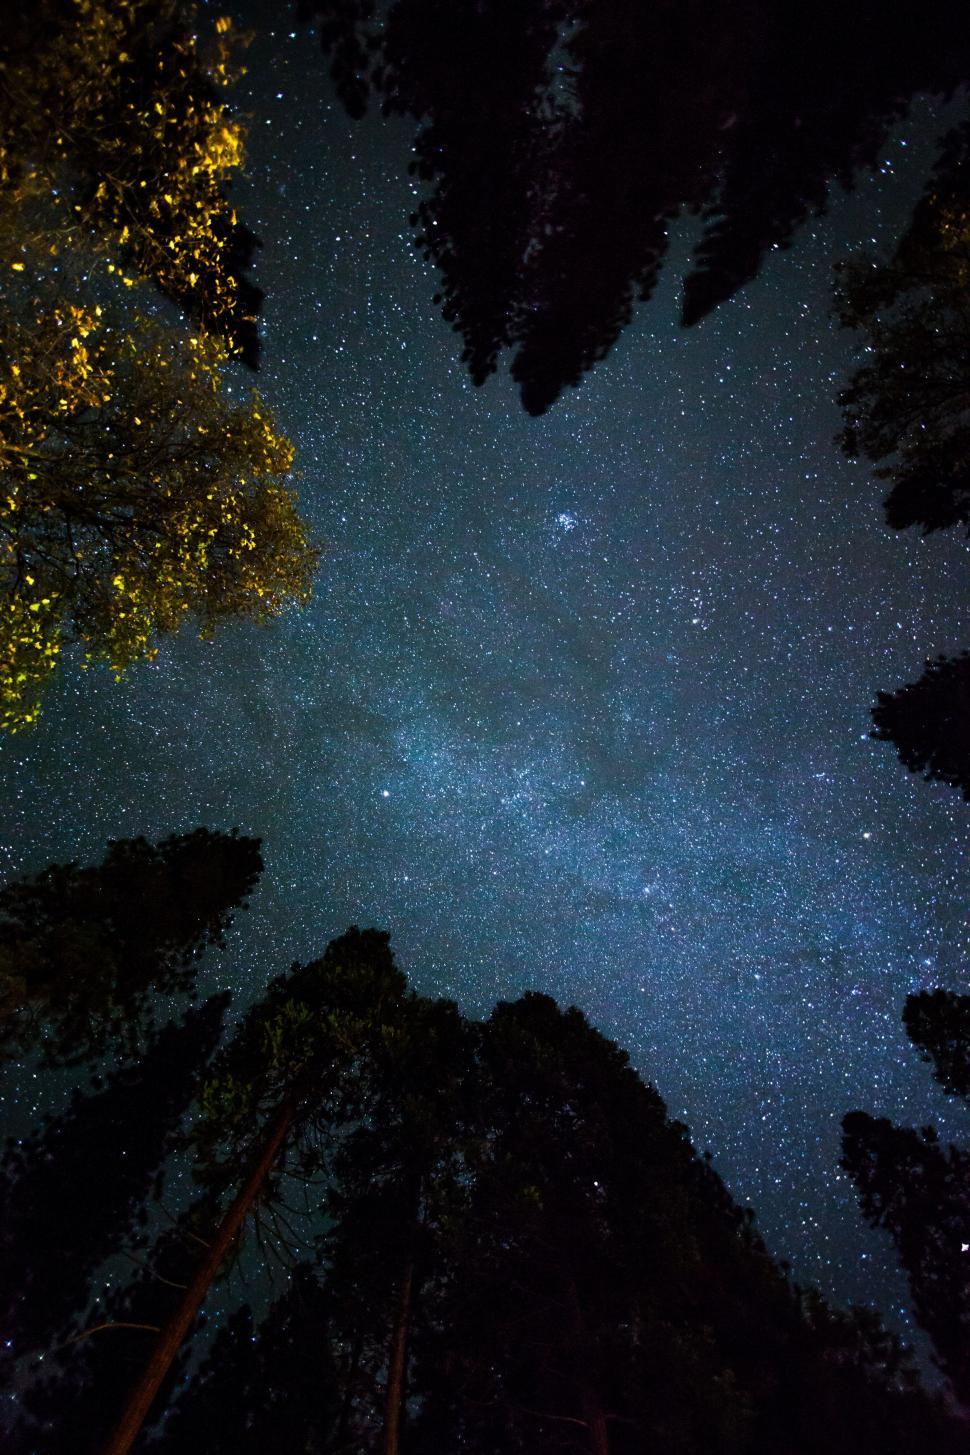 Free Image of Starry Night Sky Over Tree-filled Landscape 